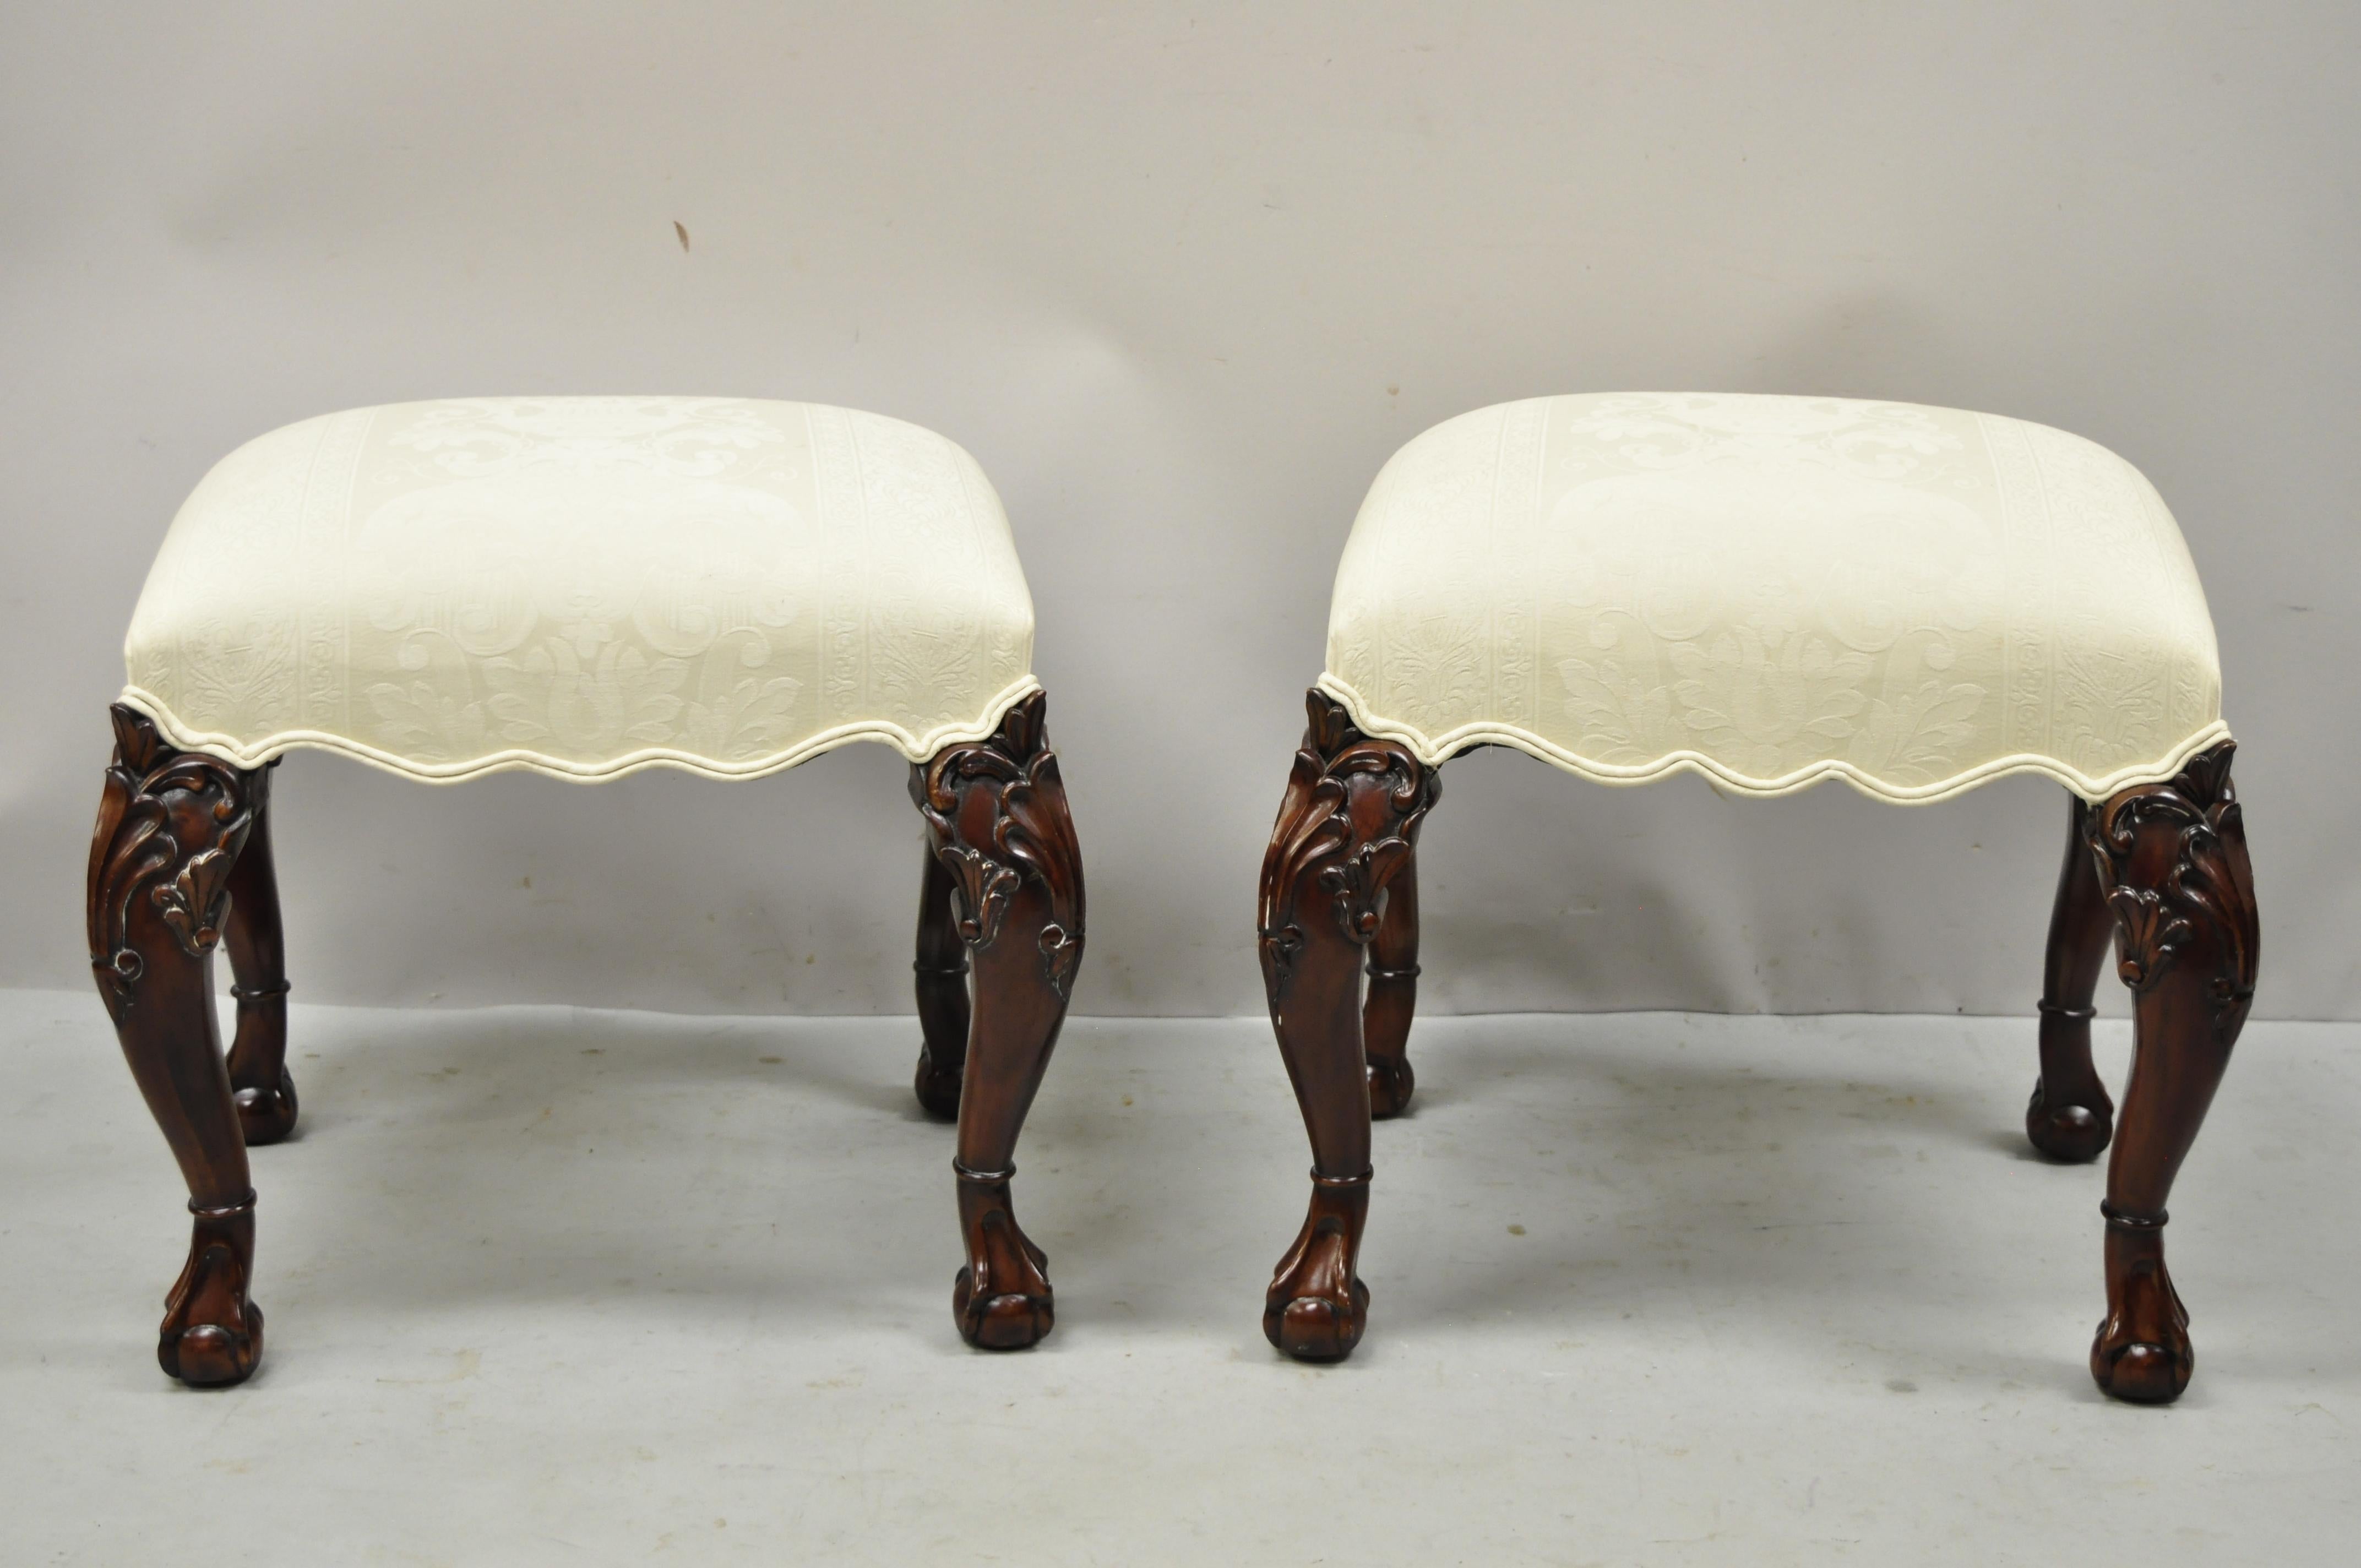 English Georgian Chippendale style carved mahogany ball and claw upholstered stools - a pair. Item features cream damask upholstery, scallop shaped skirt, solid wood construction, beautiful wood grain, nicely carved details, carved ball and claw